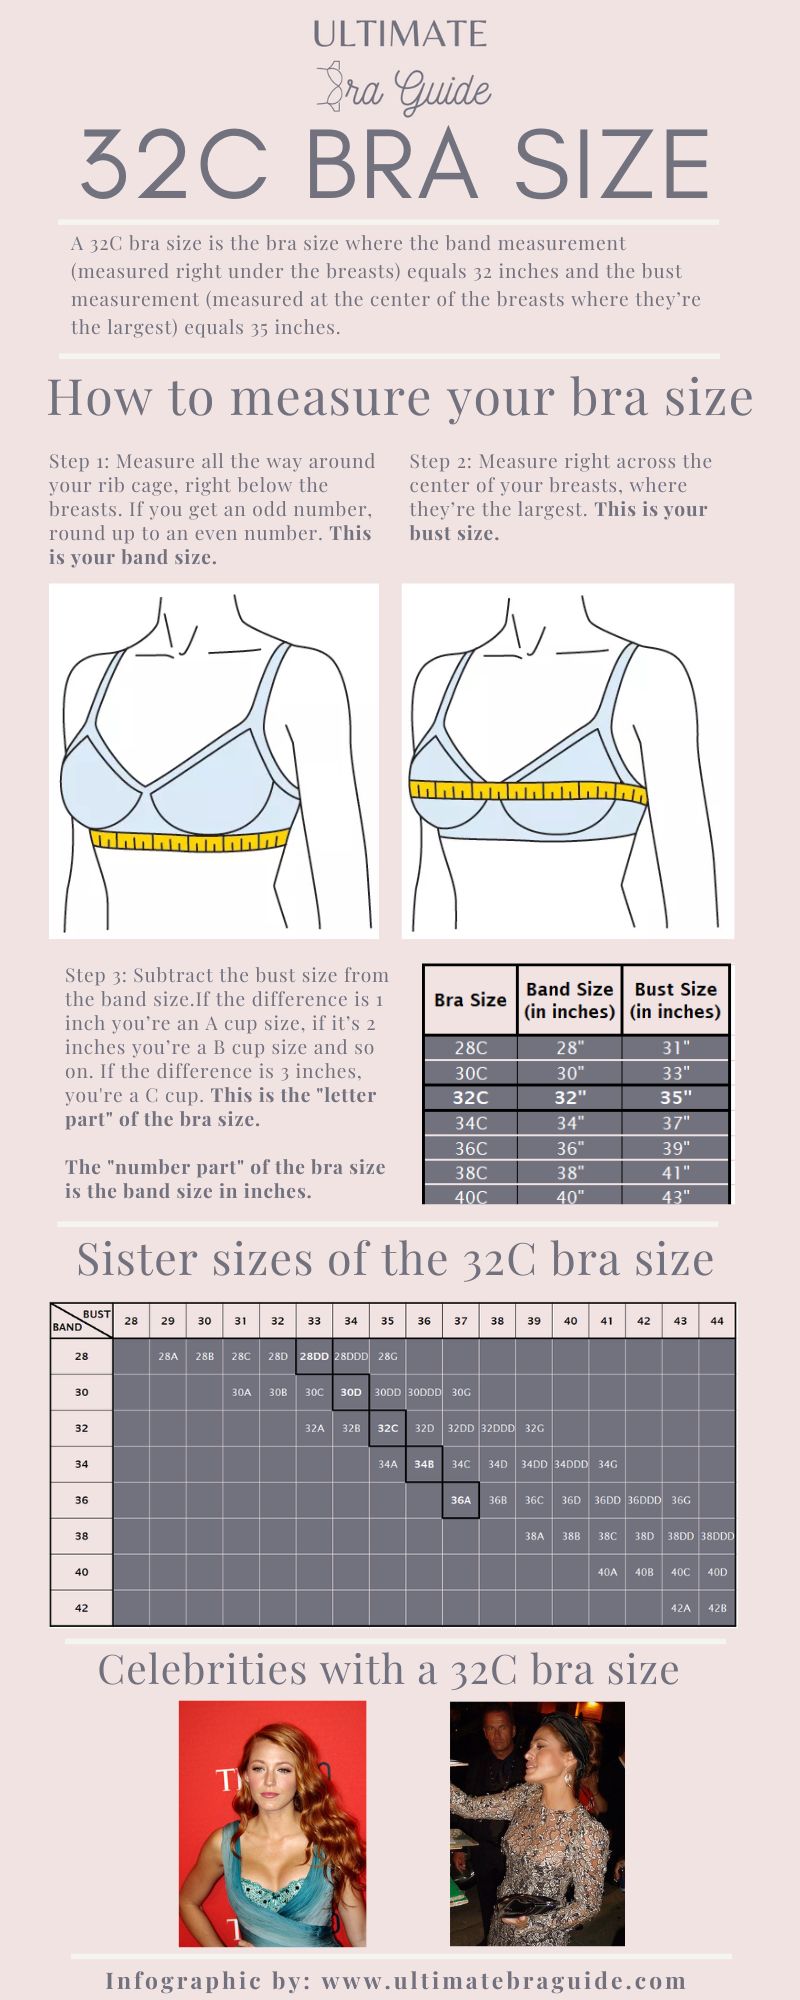 An infographic all about the 32C bra size - what it is, how to measure if you're 32C bra size, 32C bra sister sizes, 32C cup examples, and so on